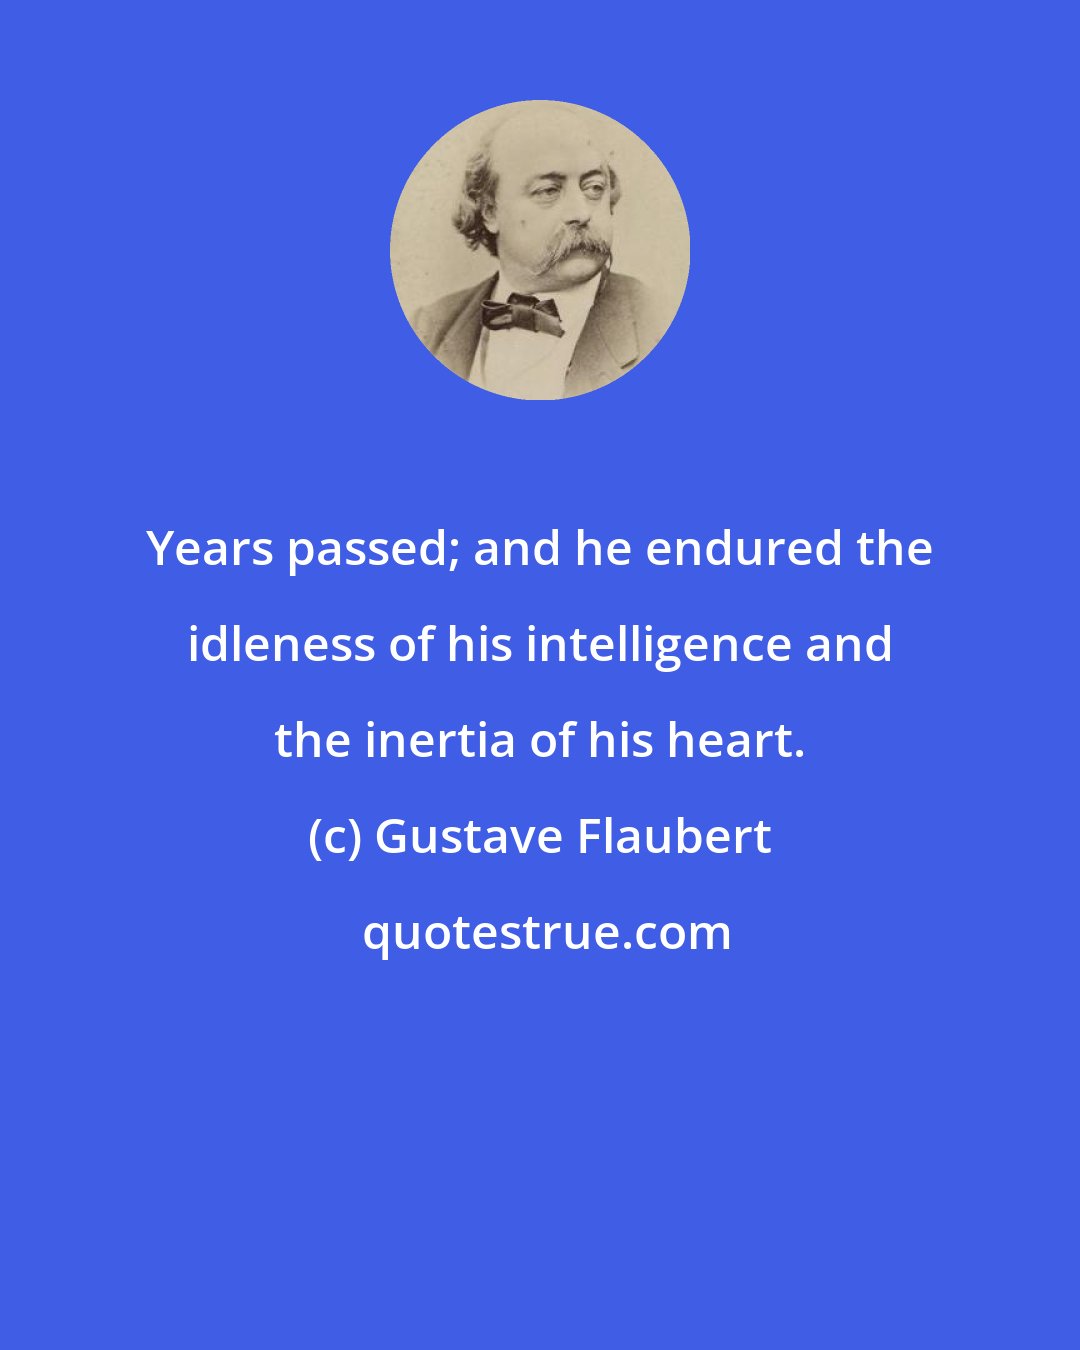 Gustave Flaubert: Years passed; and he endured the idleness of his intelligence and the inertia of his heart.